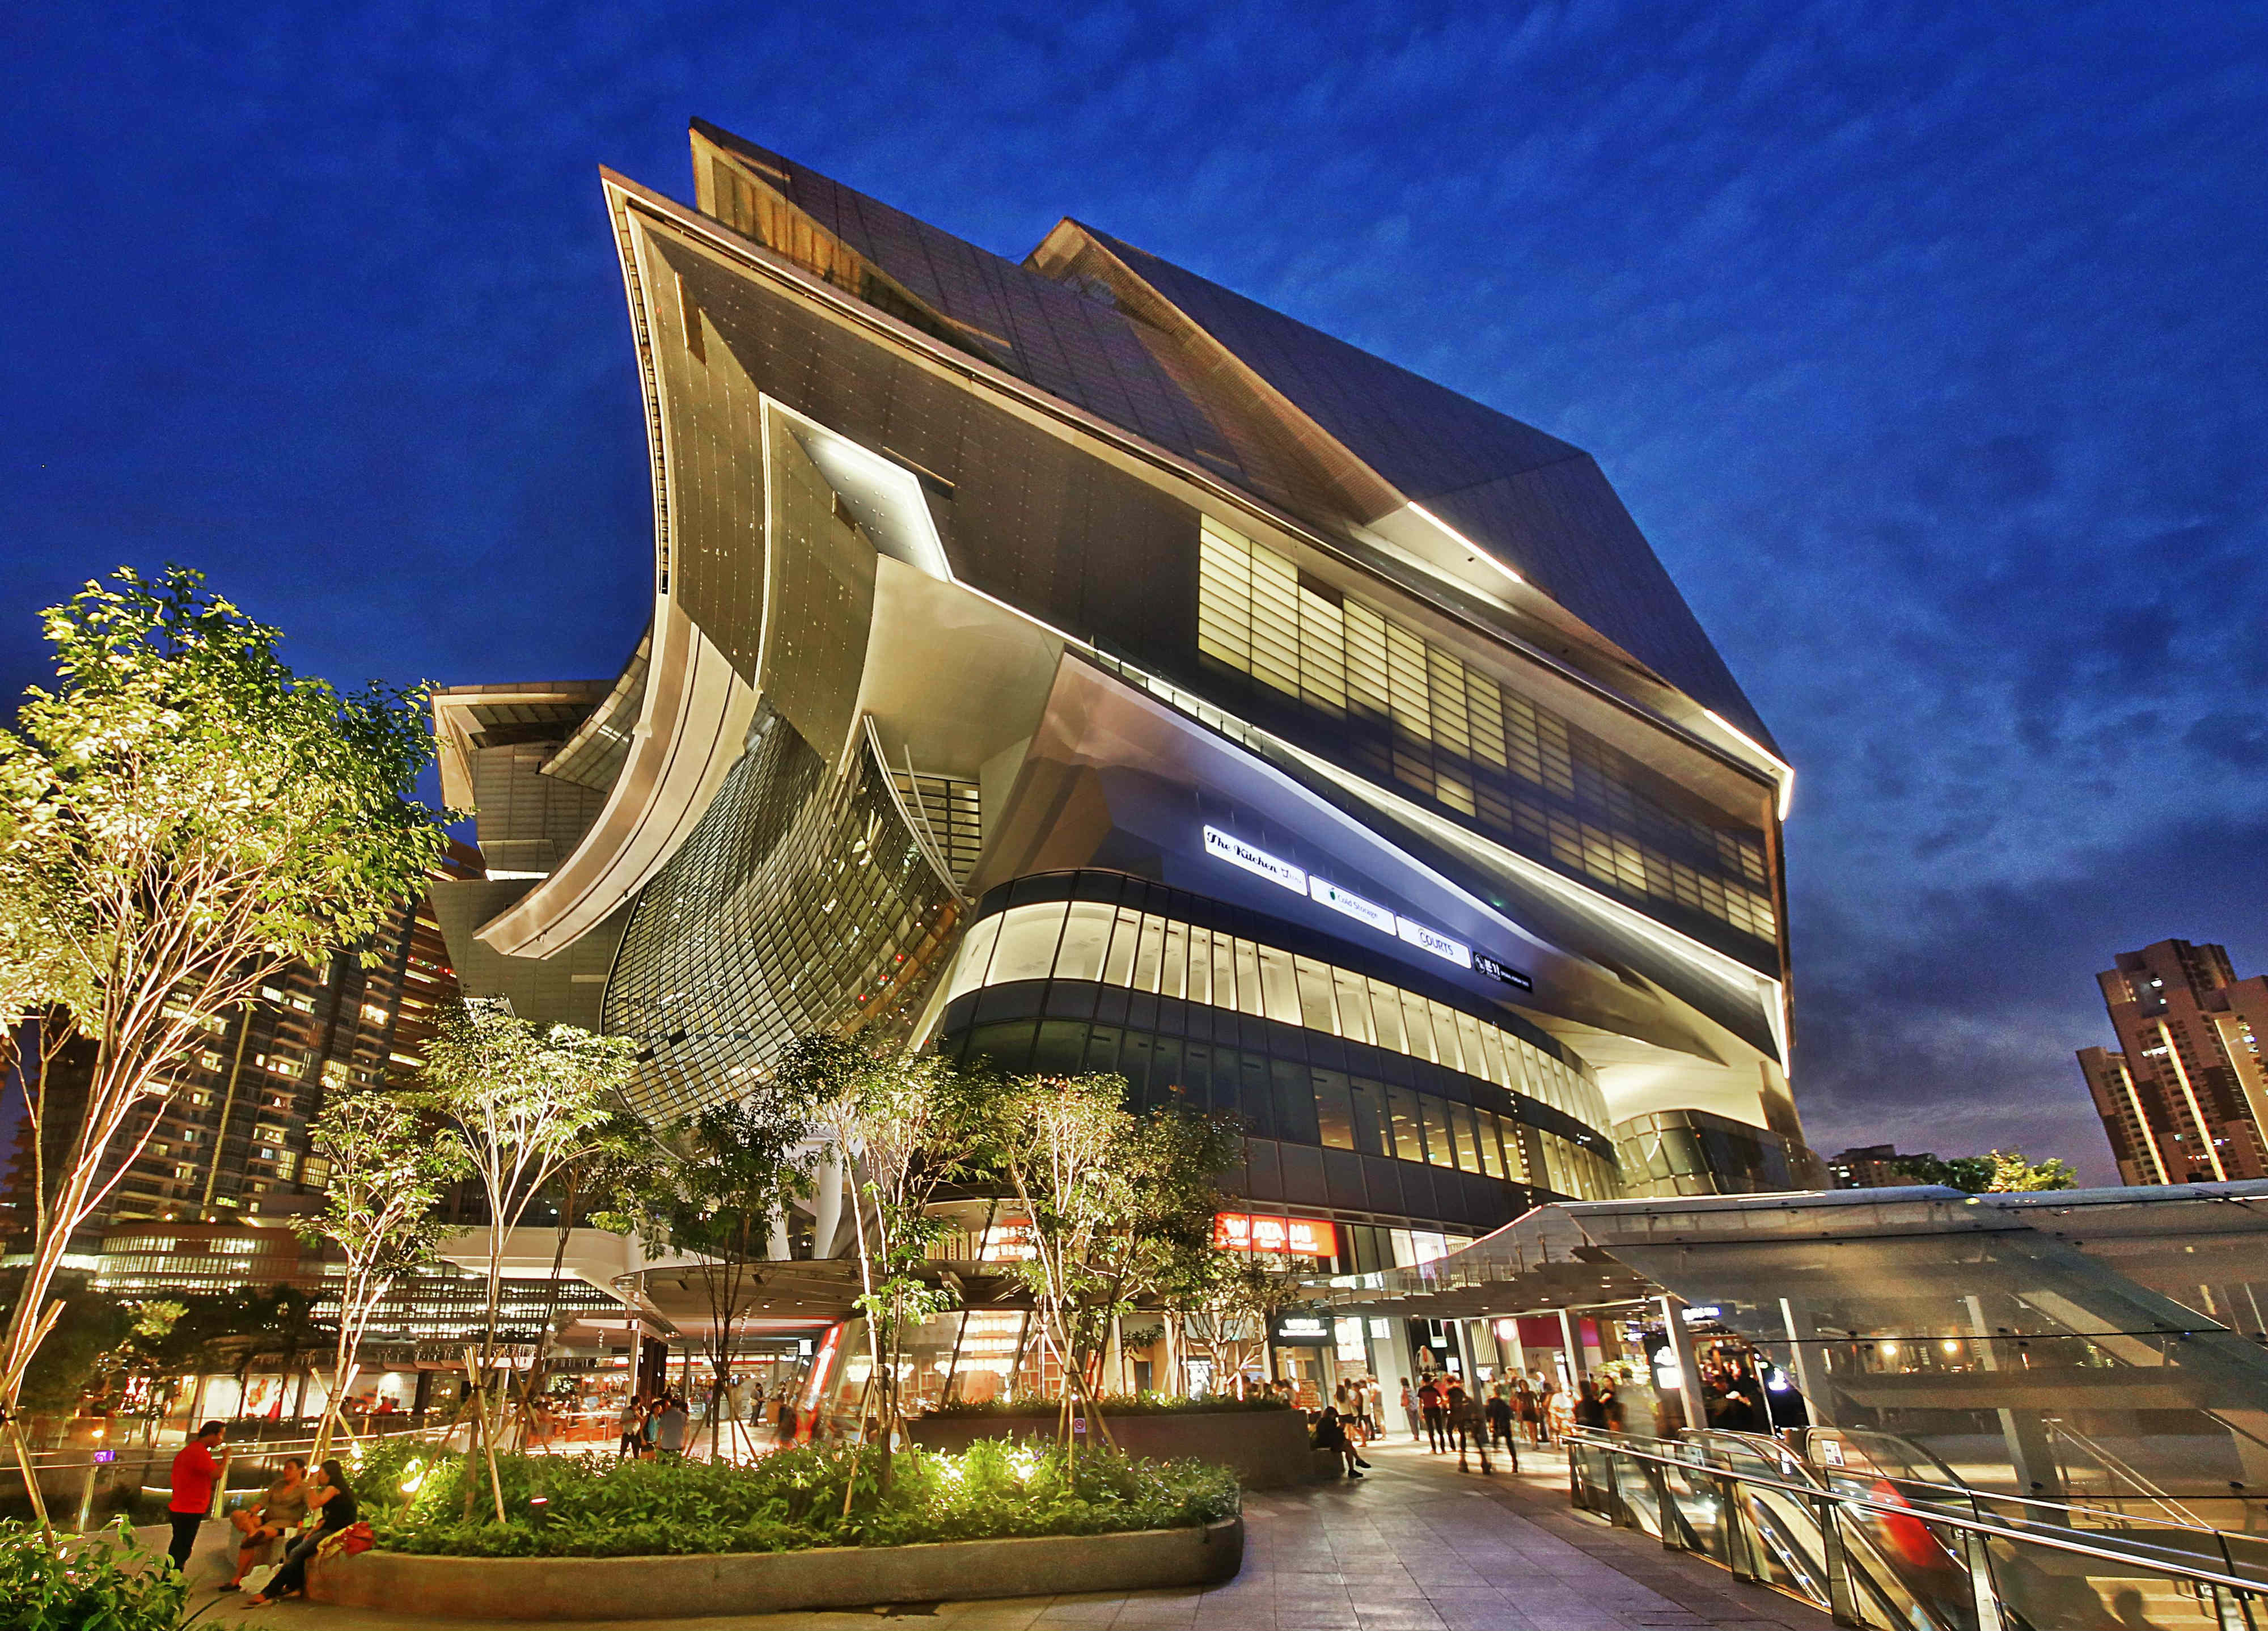 CapitaLand to sell The Star Vista for 296M to New Creation Church unit